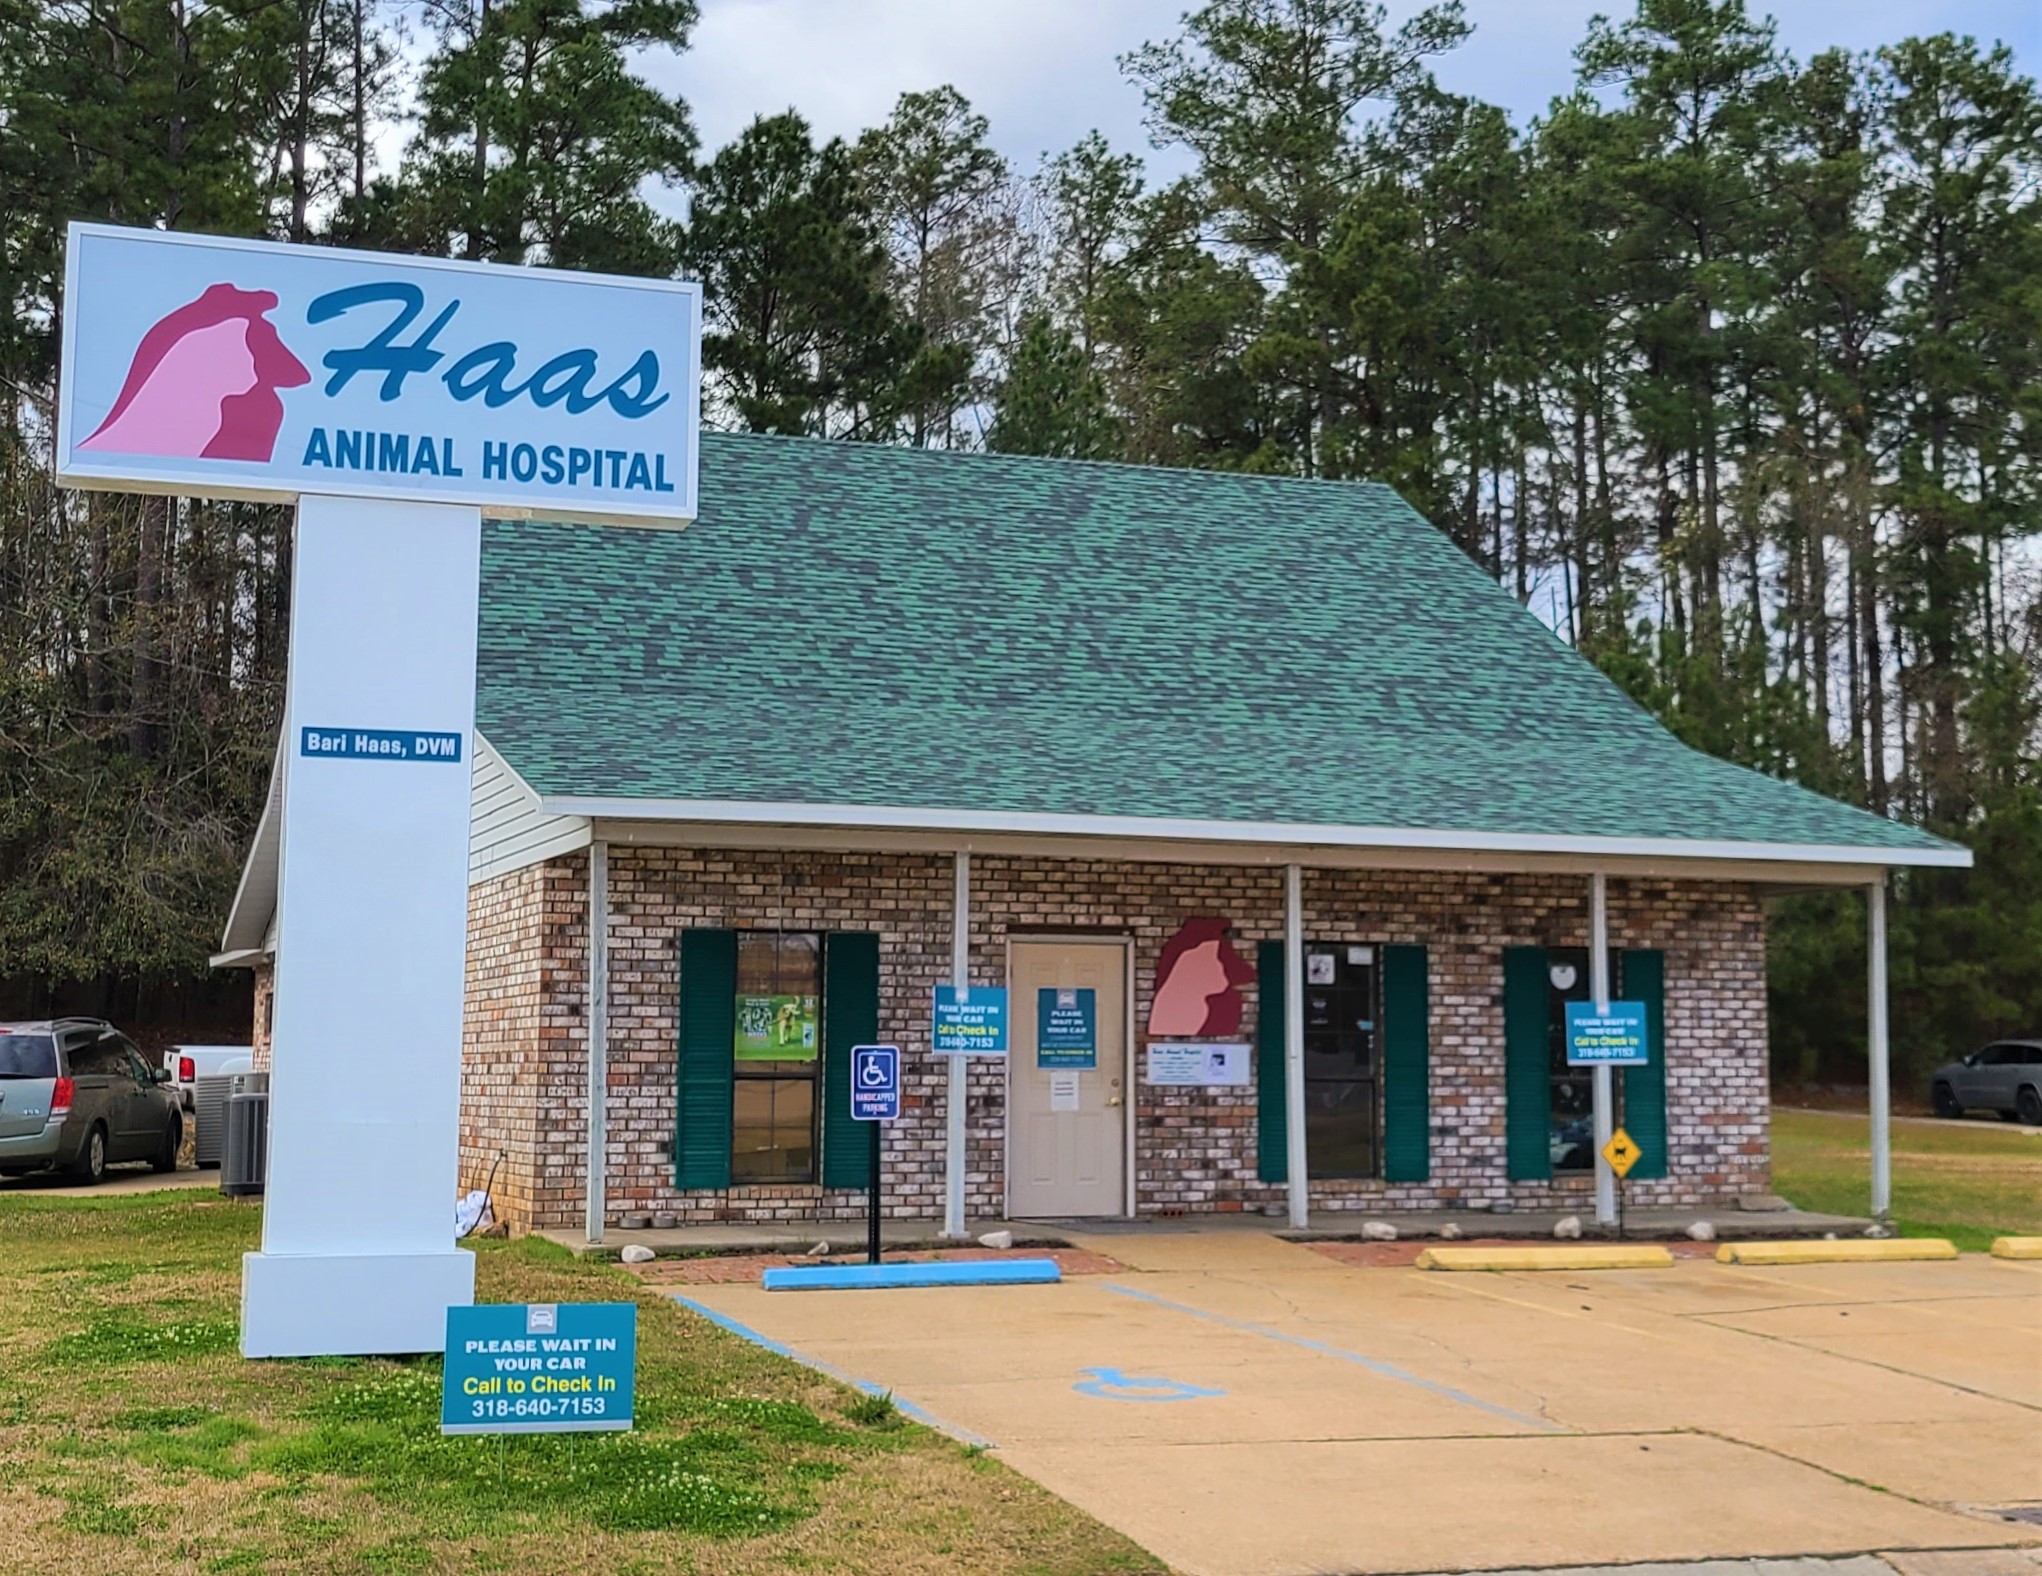 Haas Animal Hospital Building with a sign